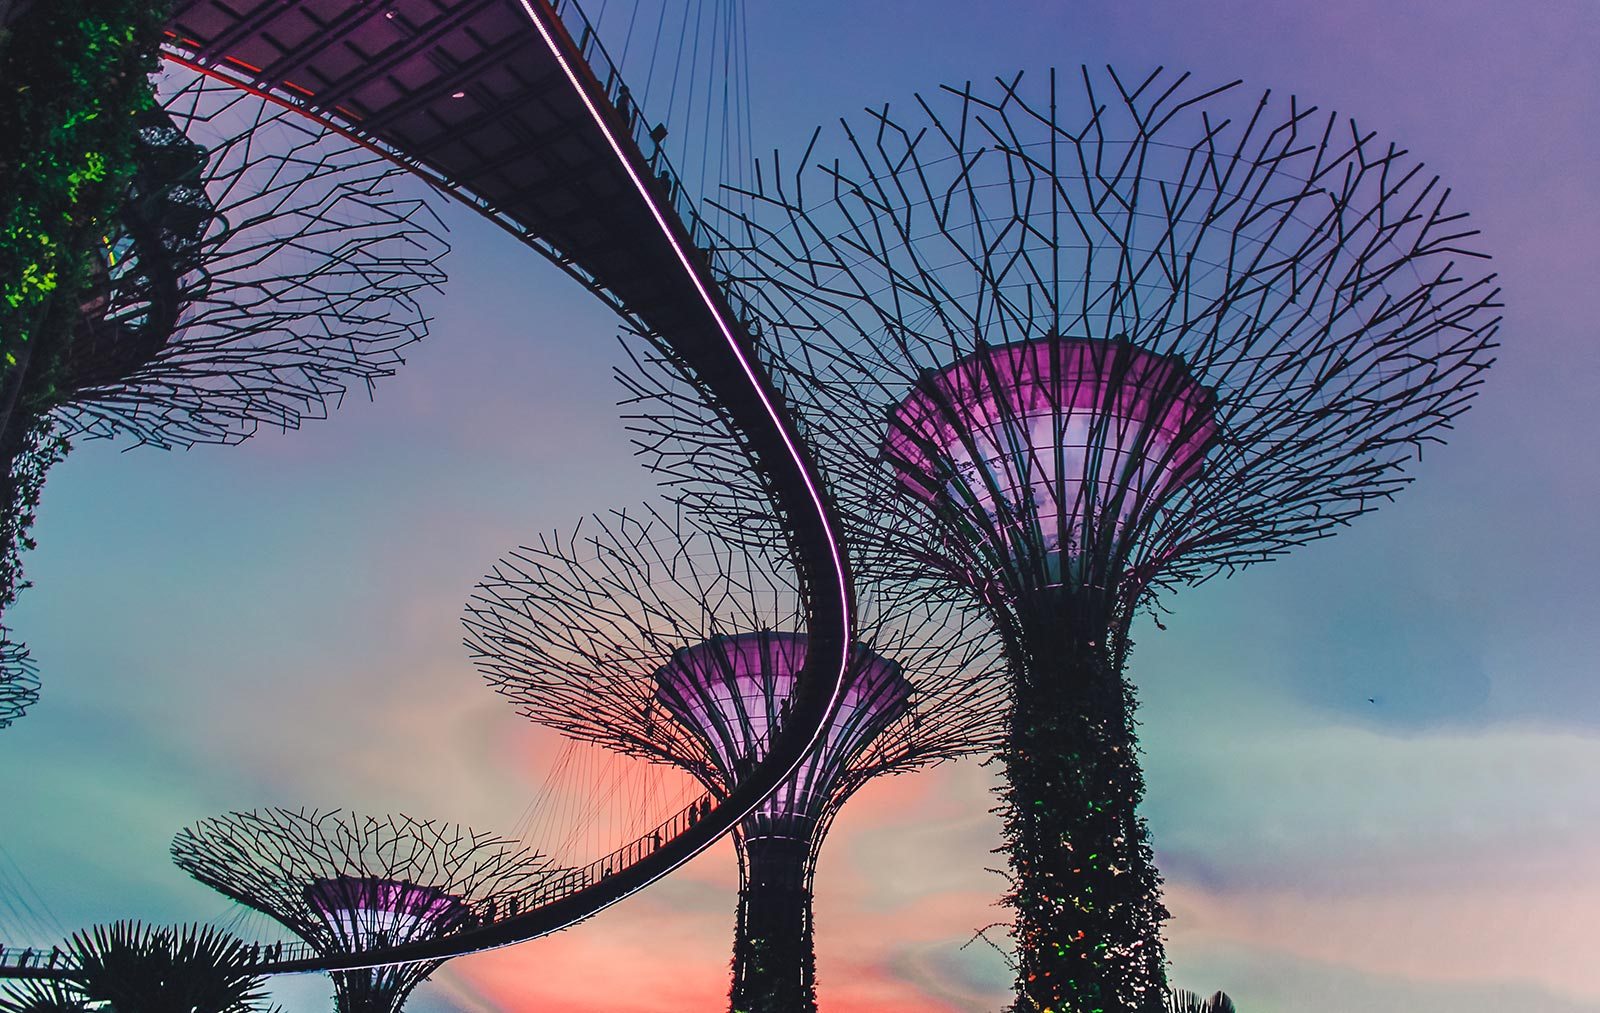 Supertrees at the Gardens by the Bay Singapore